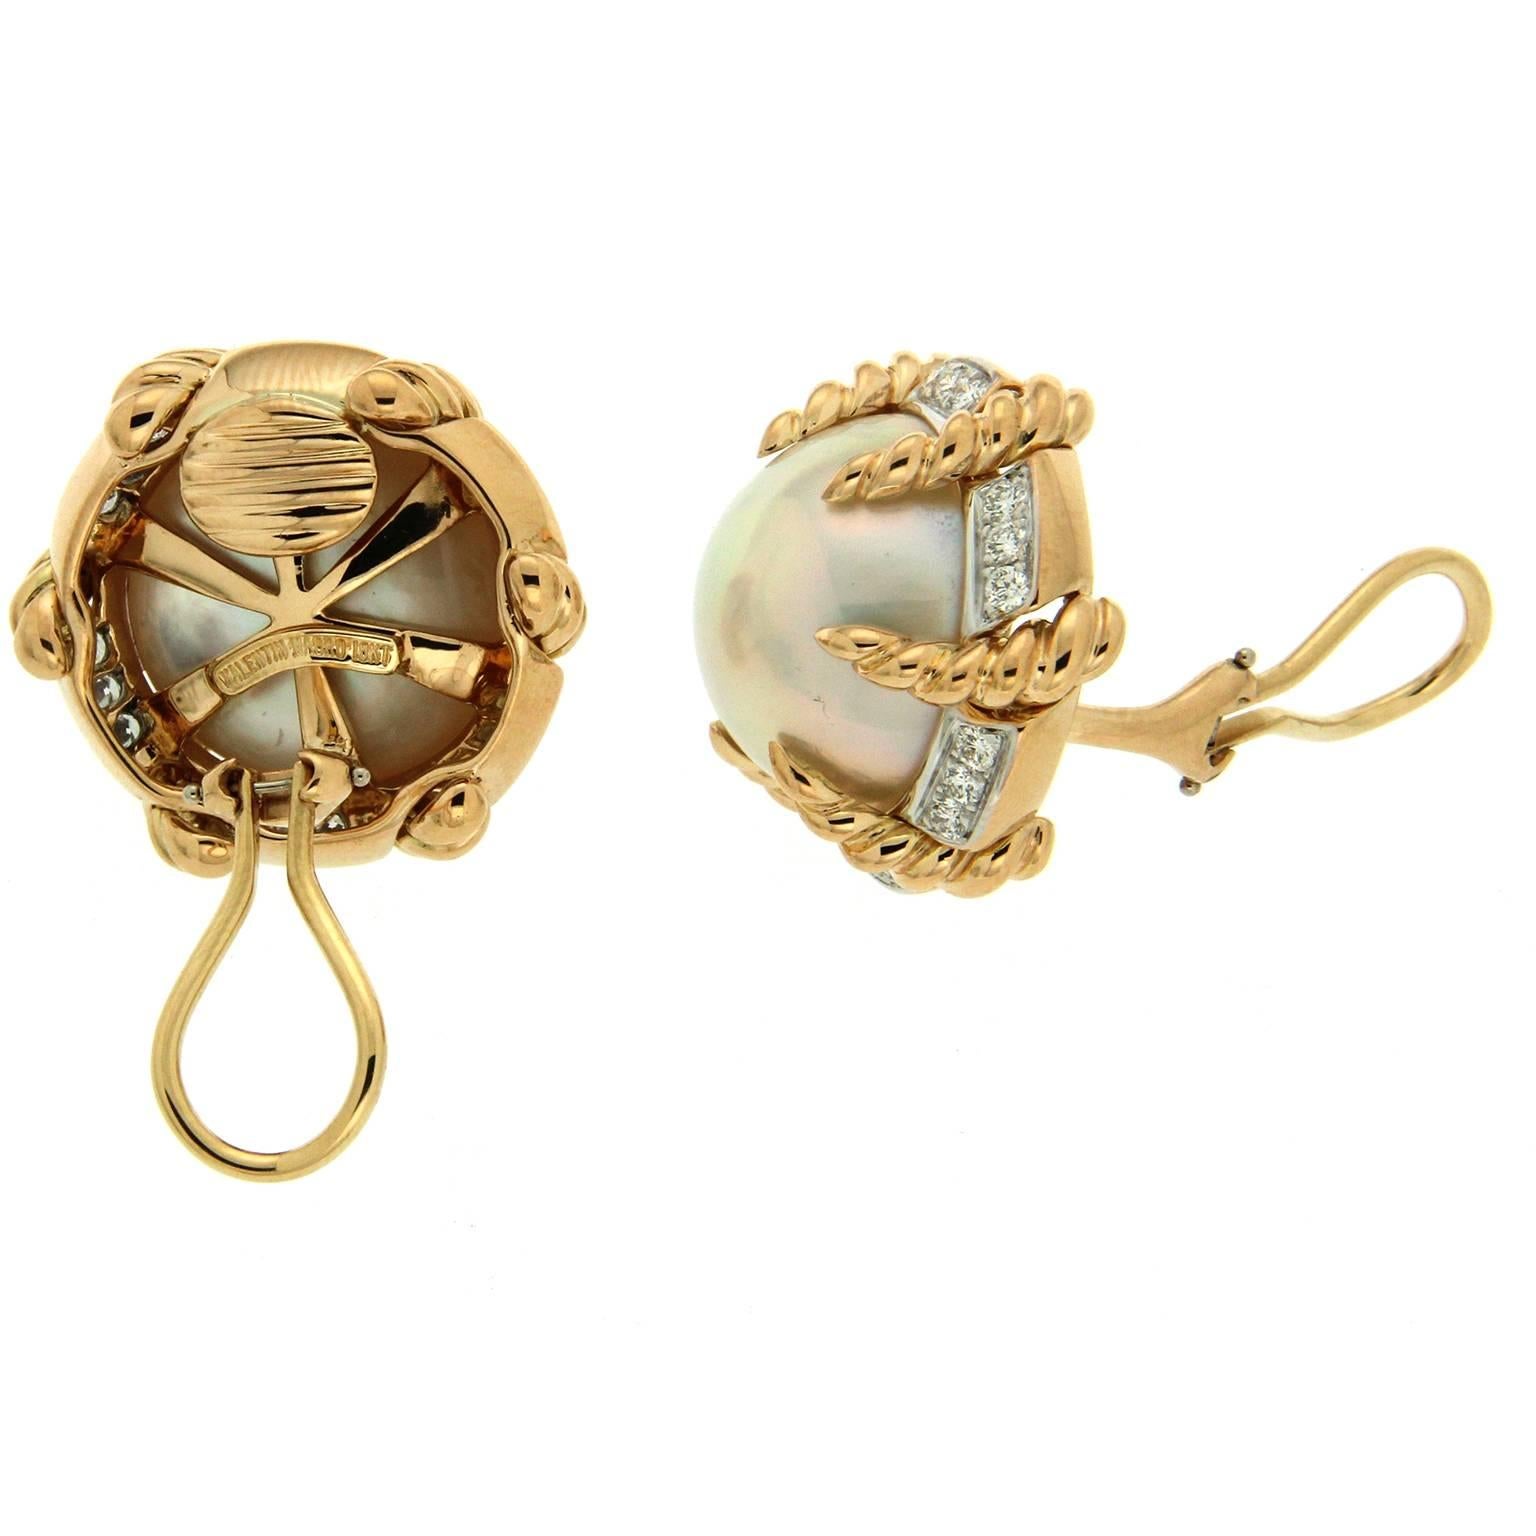 These earrings are made in 18kt yellow gold, they feature mabe pearls and round brilliant diamonds with a carat total weight of 1.08. Backs are clip-backs.